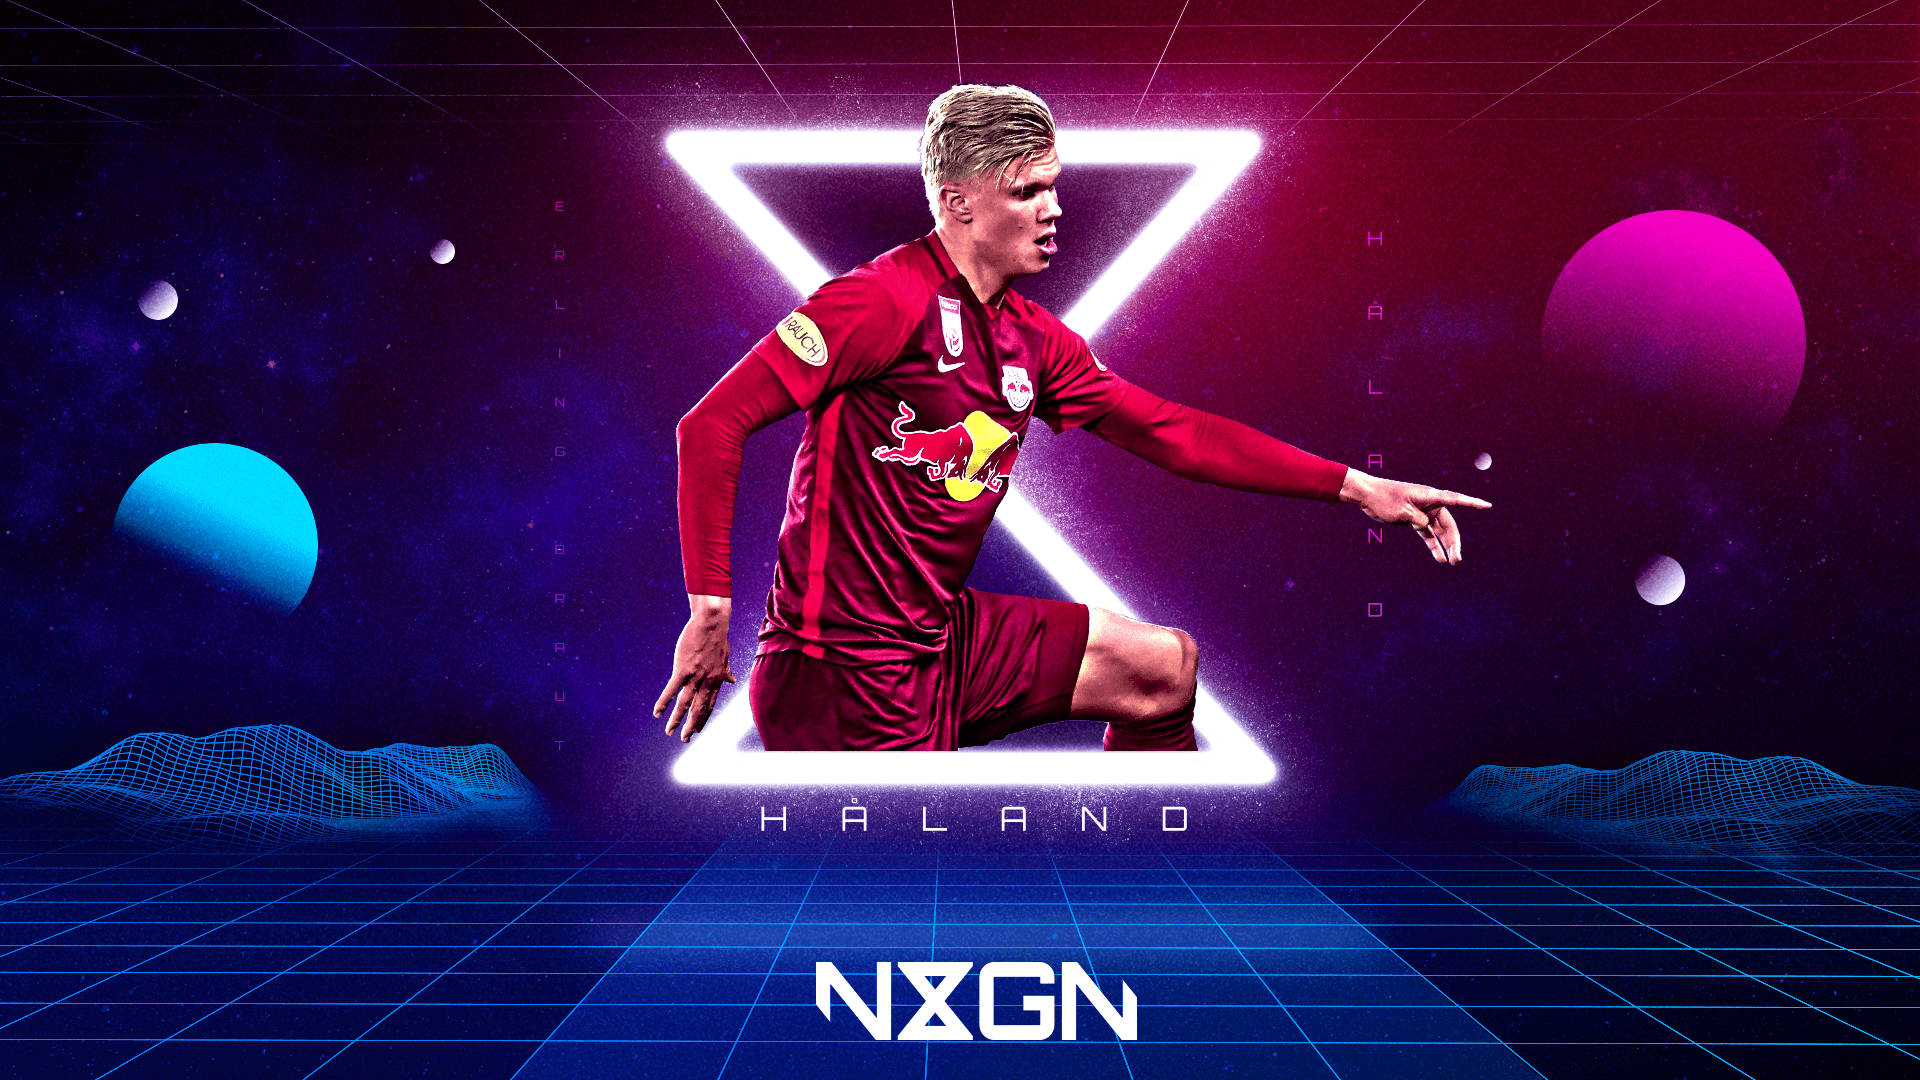 Erling Haaland Red Bull Player Vector Art Background